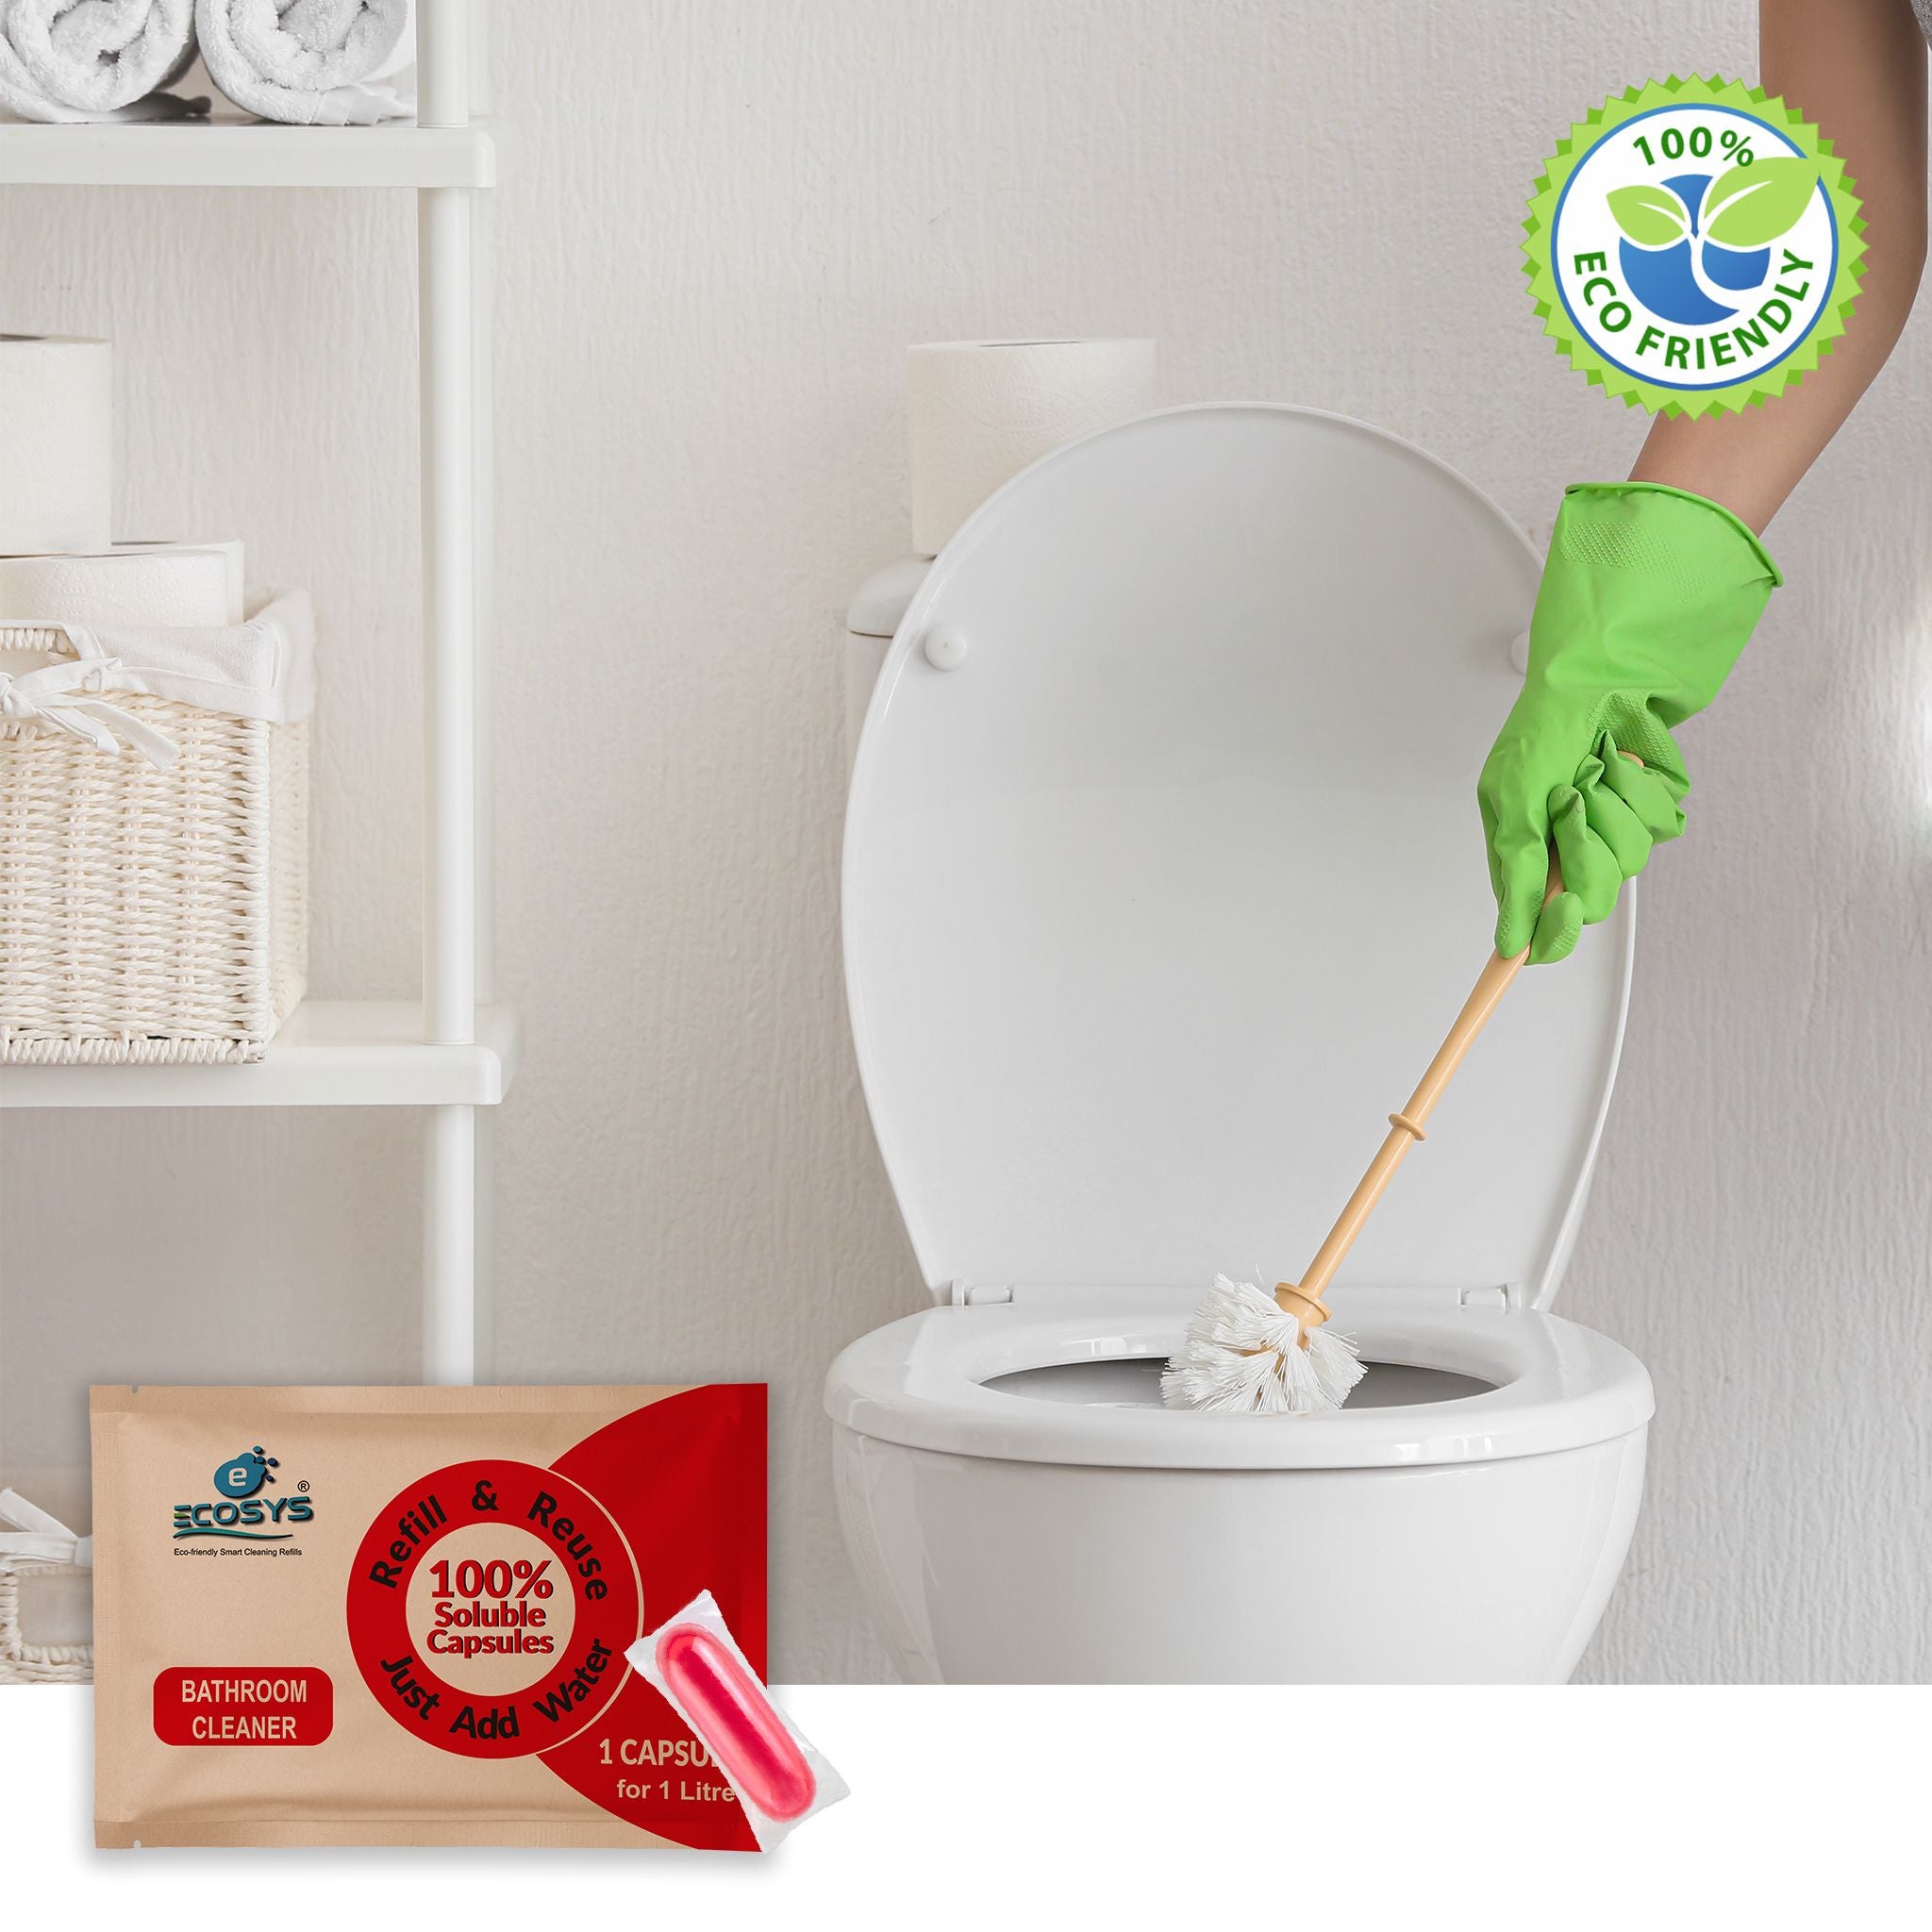 Ecosys Disinfectant Toilet & Bathroom Cleaner | Removes hard stains | Non Toxic(5 litres)